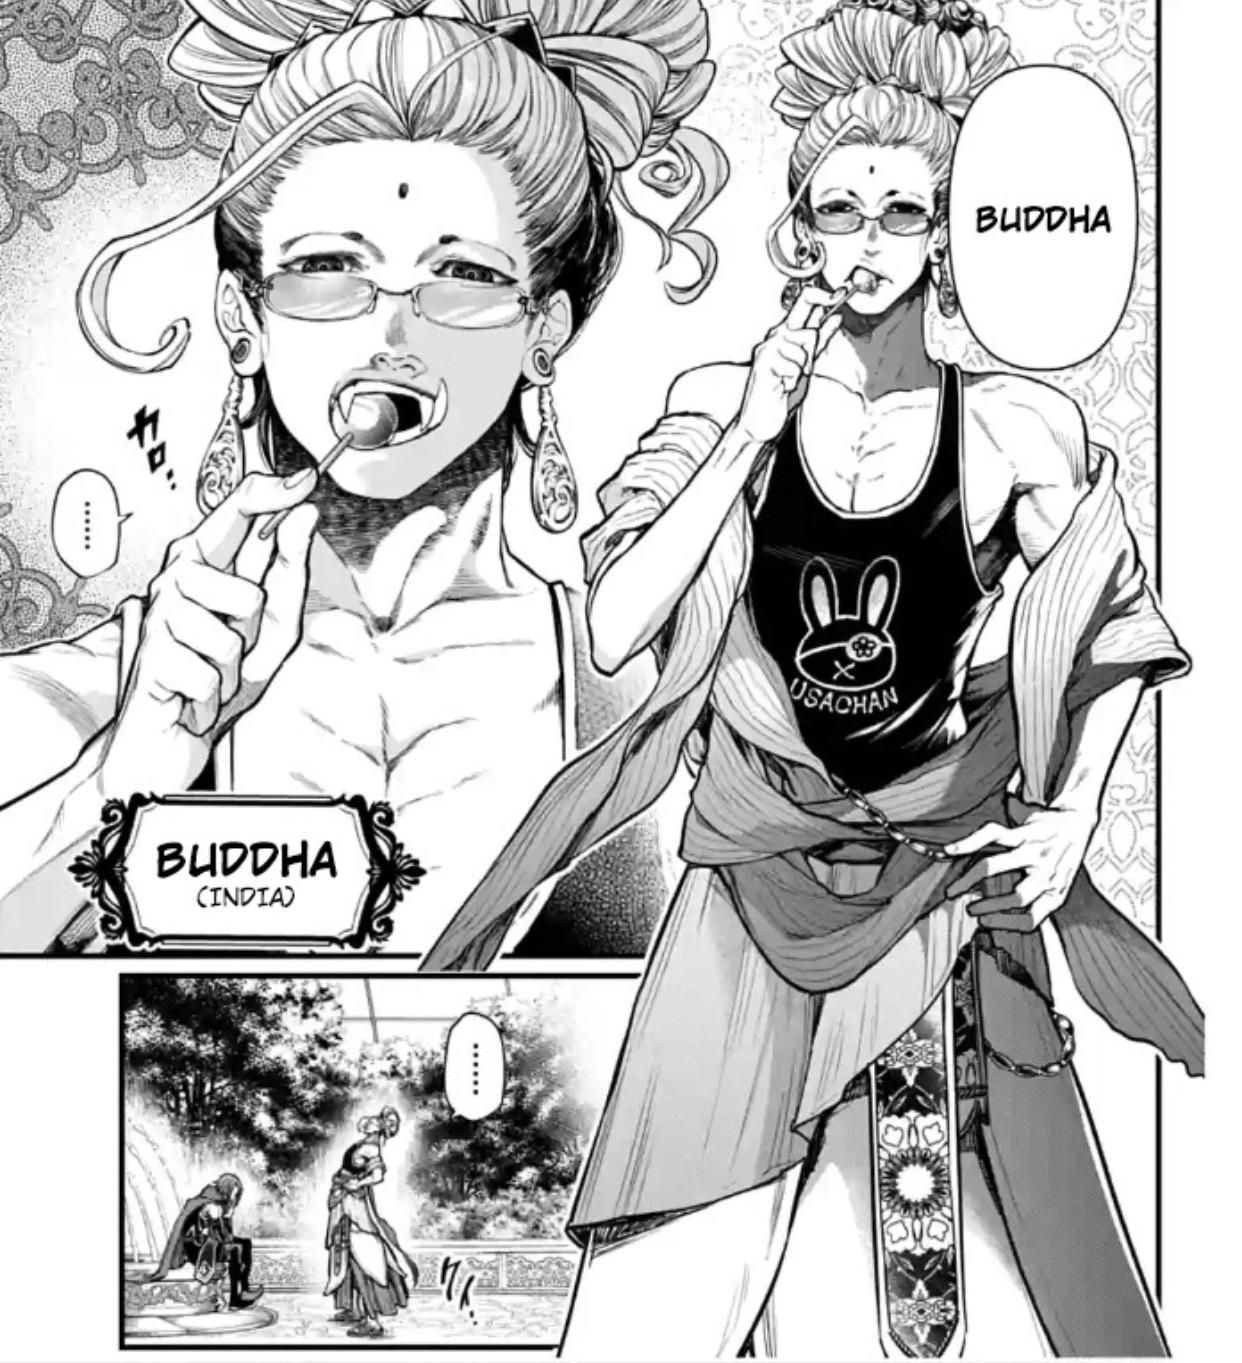 Buddha looks sick (Record of Ragnarok)follow up or reply to this content. Manga collection, Comic style art, Manga artist